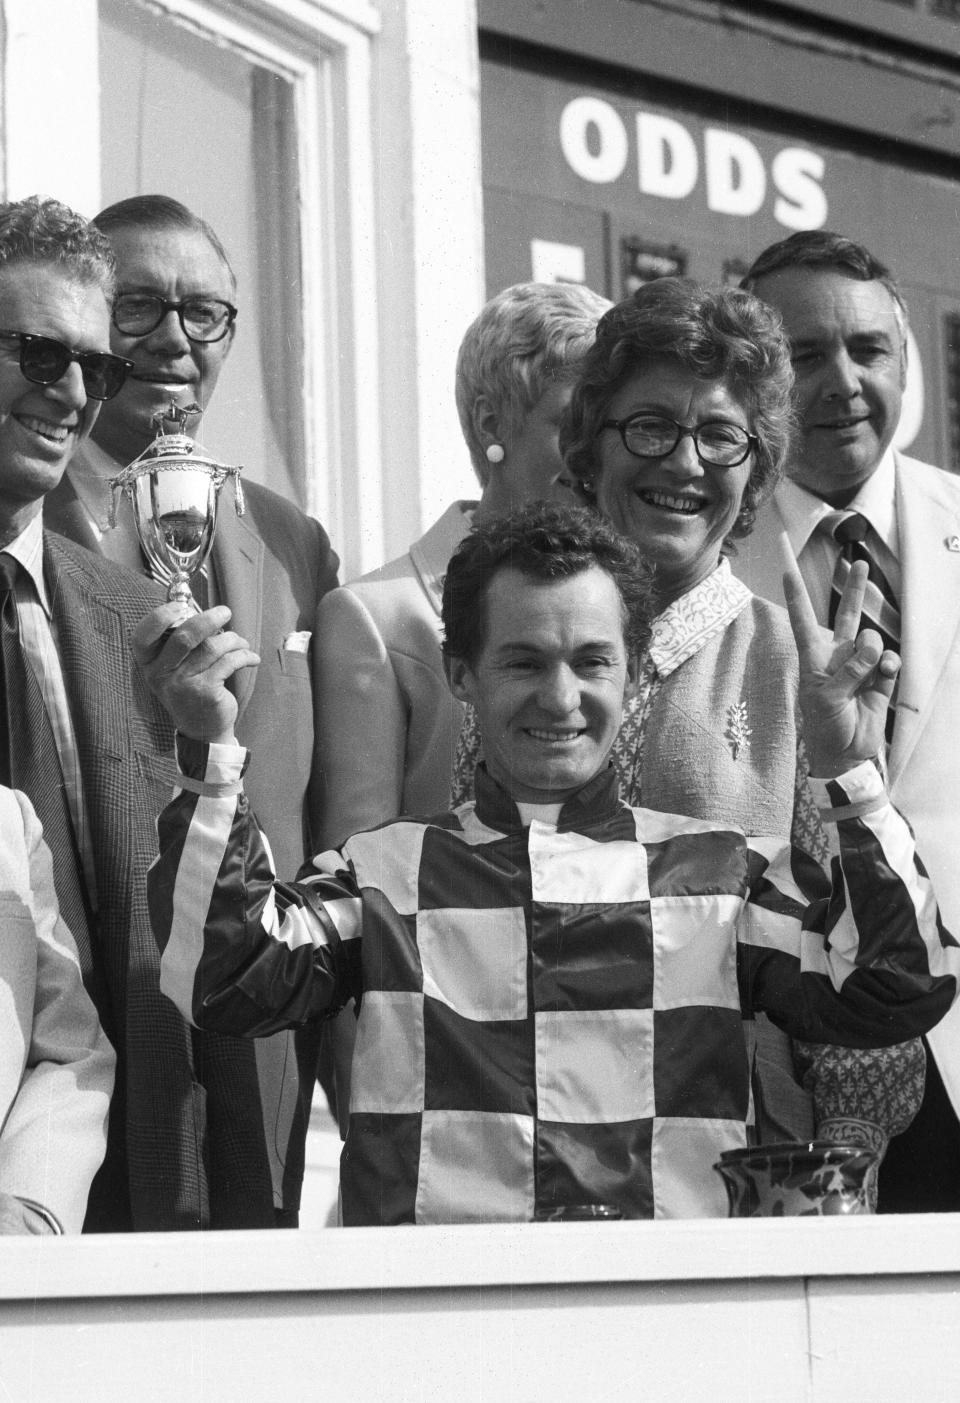 Ron Turcotte holds up his trophy after winning the 99th Kentucky Derby abroad Secretariat at Churchill Downs.